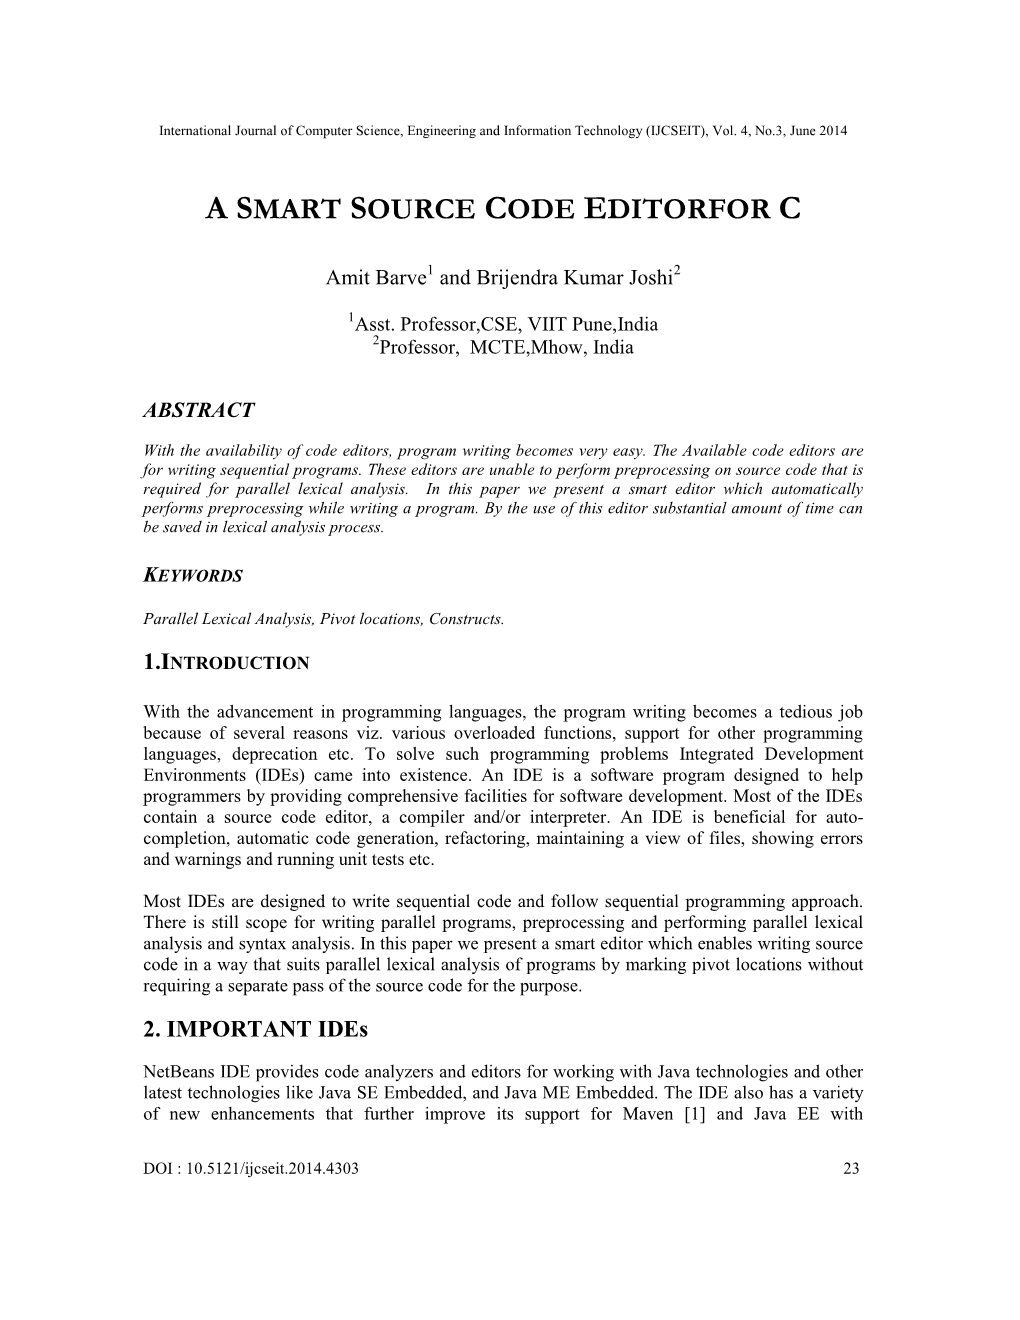 A Smart Source Code Editorfor C